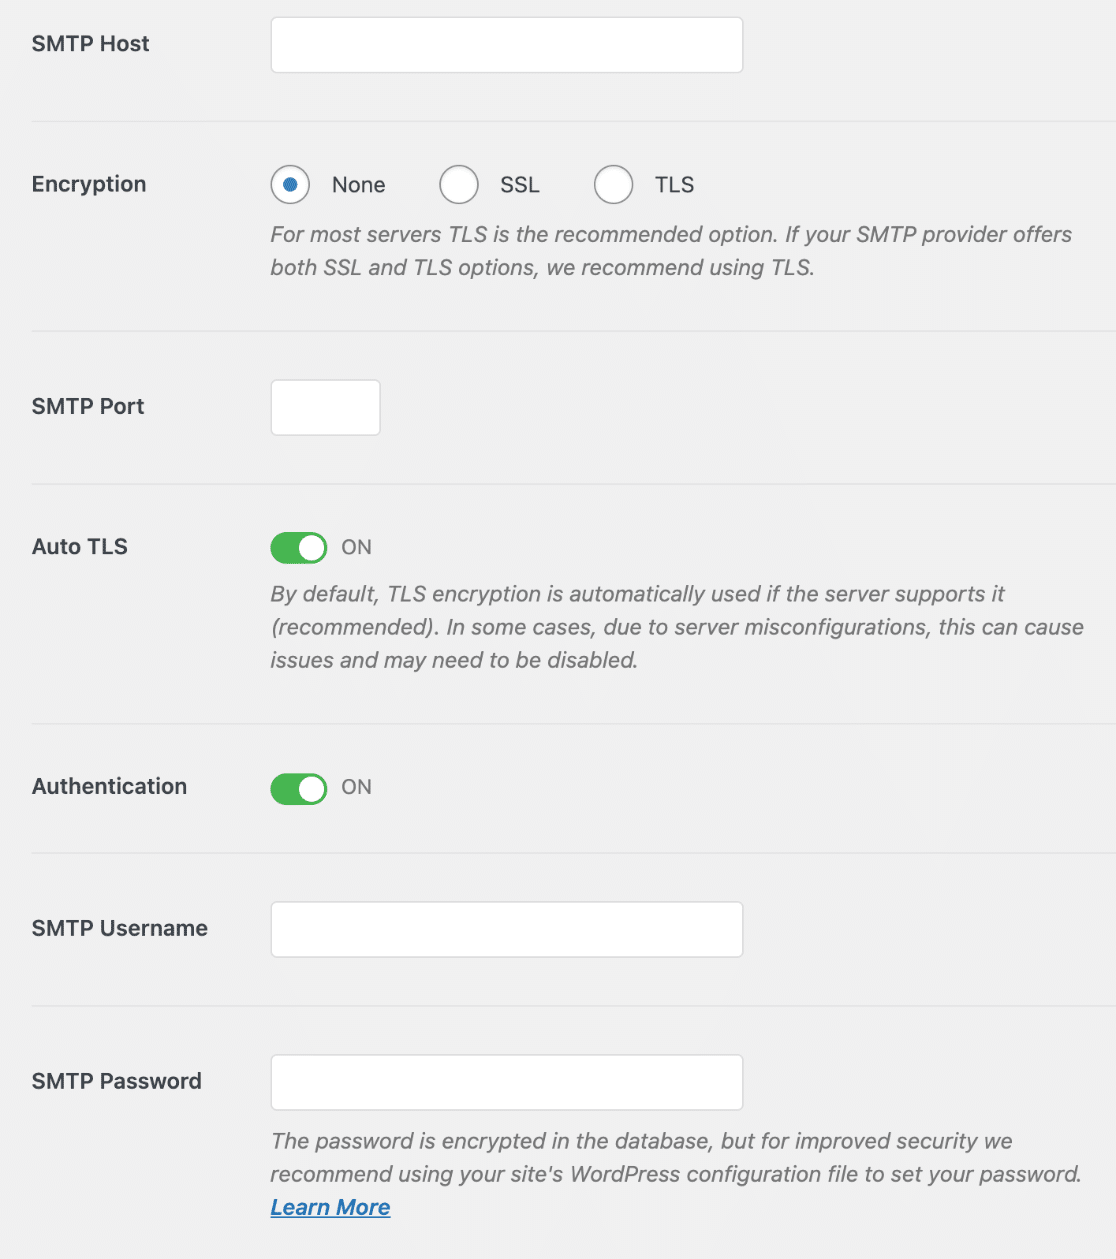 Other SMTP settings